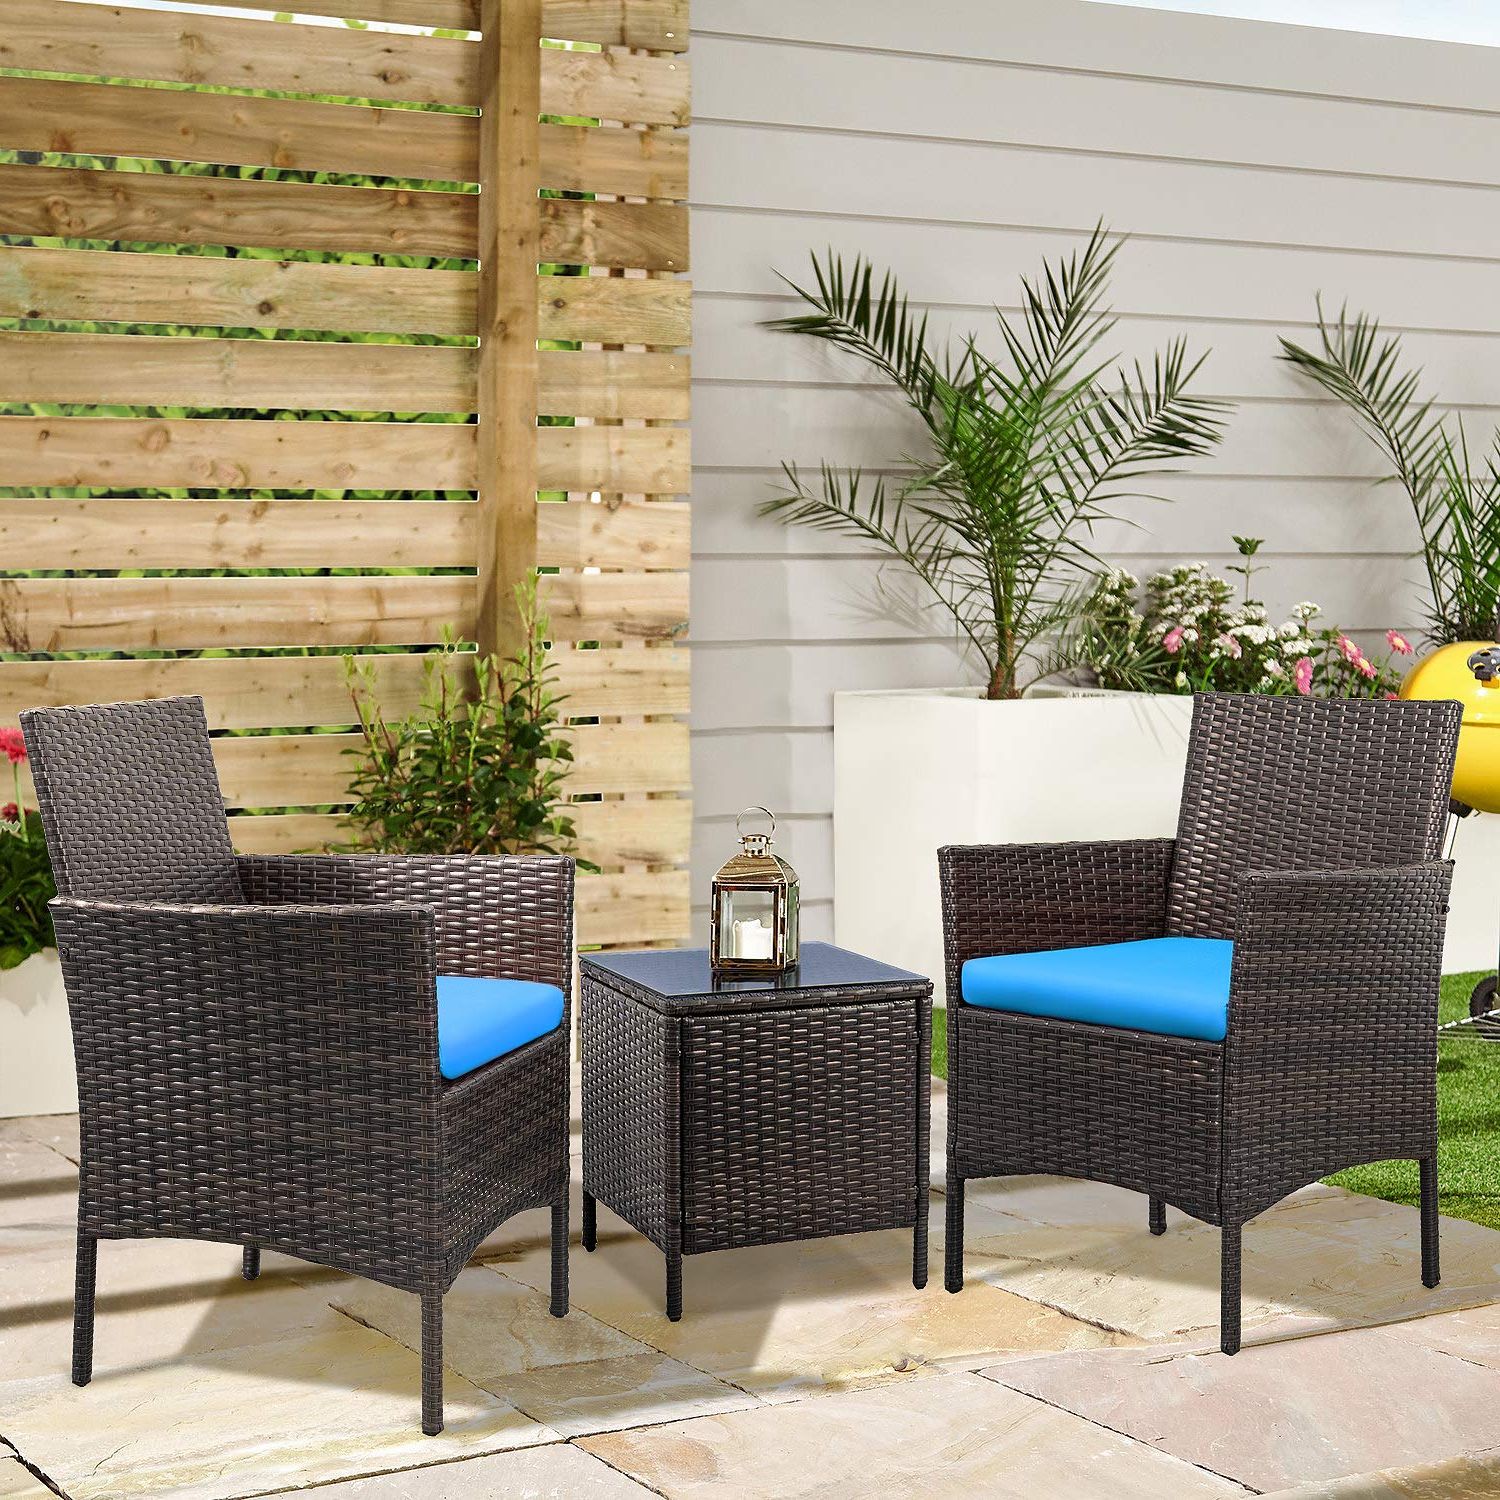 Blue And Brown Wicker Outdoor Patio Sets Inside 2019 Walnew 3 Pcs Outdoor Patio Furniture Pe Rattan Wicker Table And Chairs (View 11 of 15)